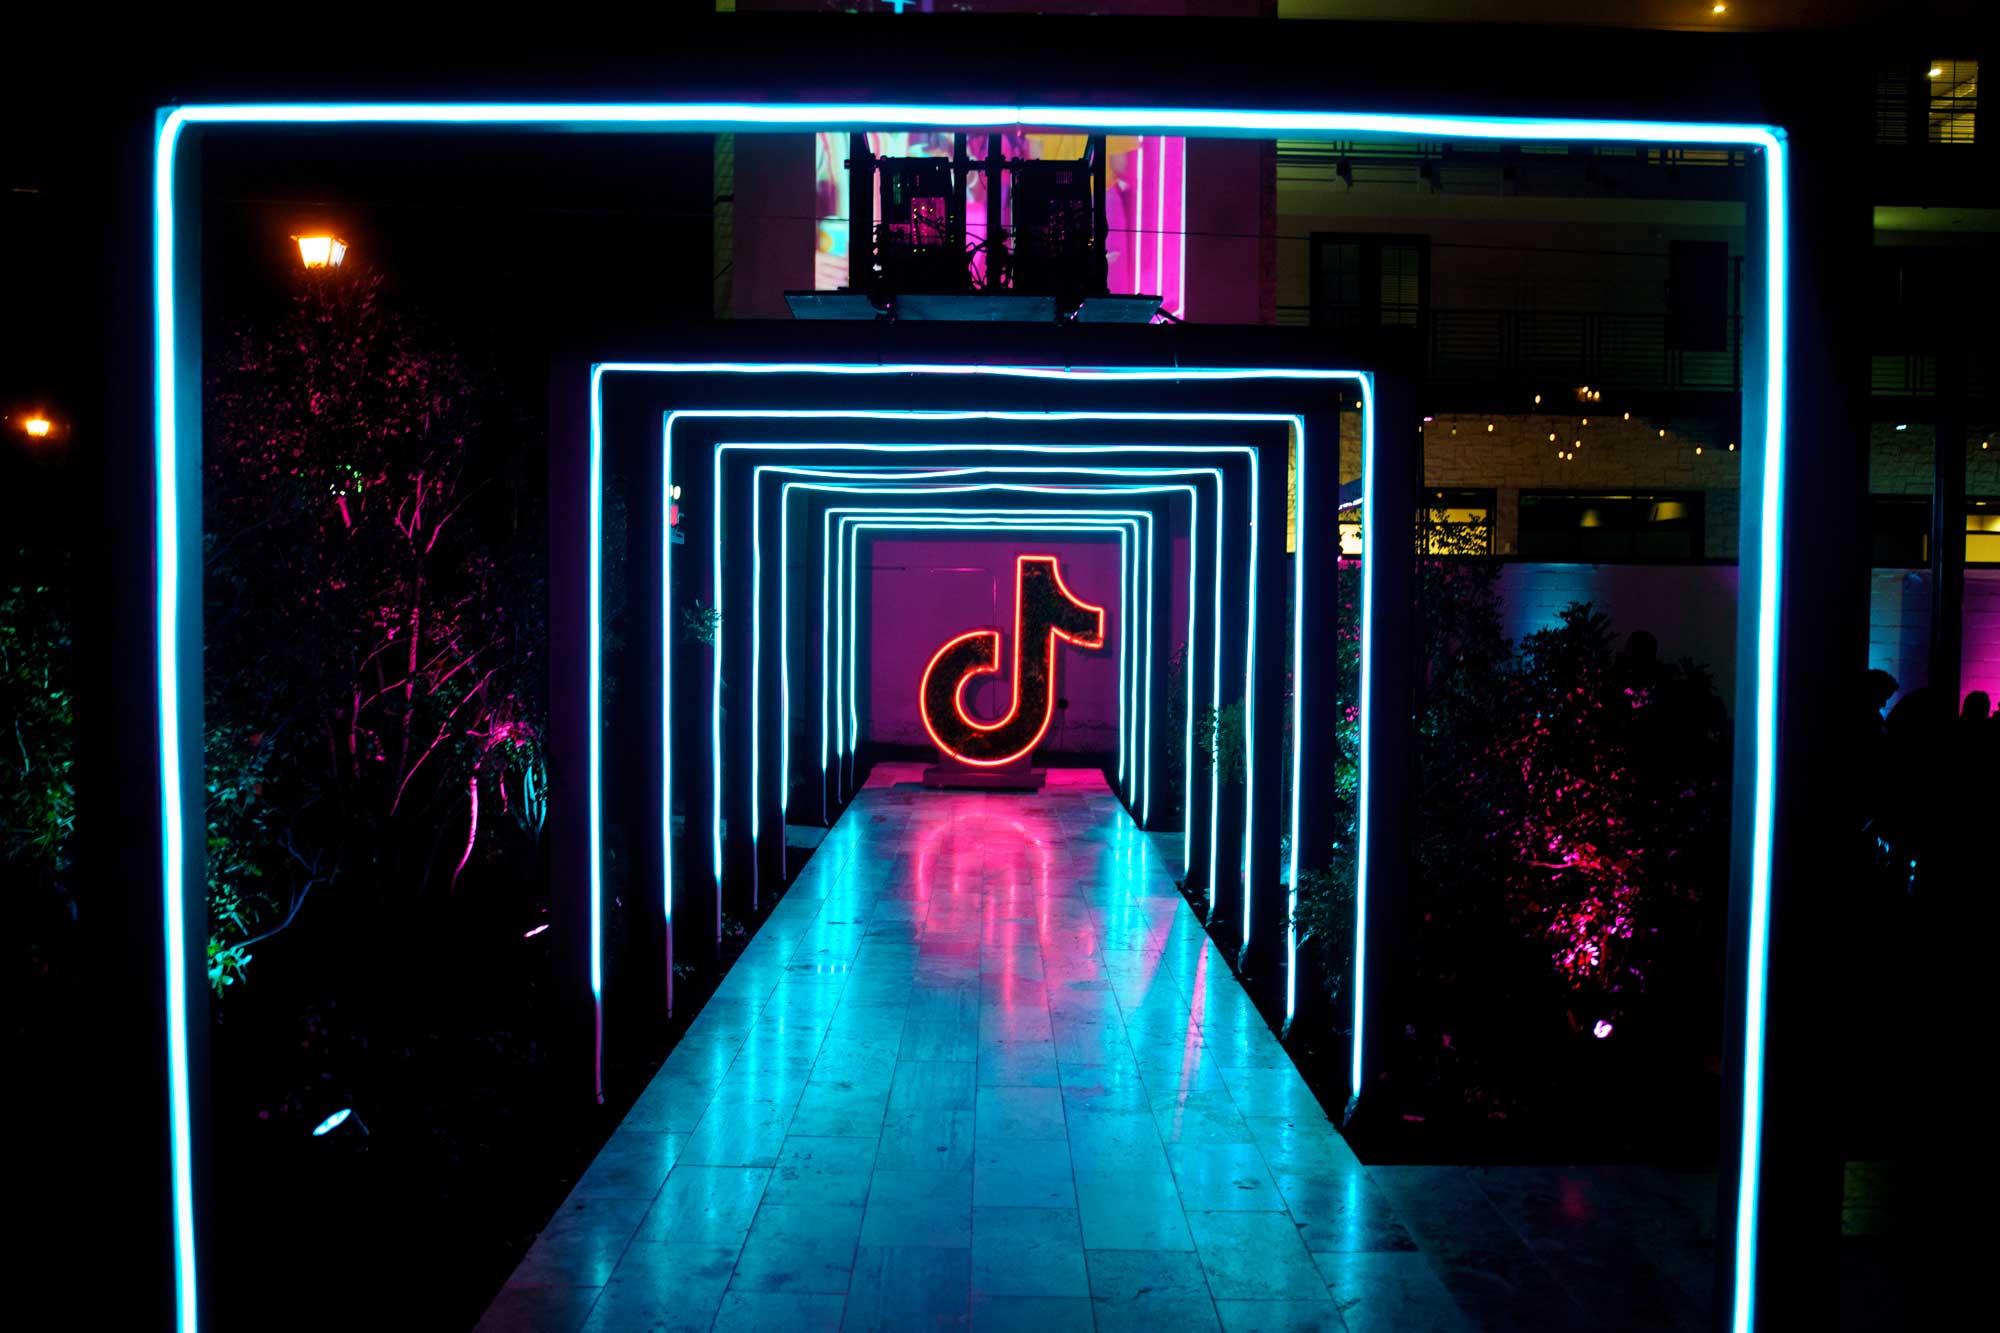 Mc2 creates and immersive brand experience for TikTok at SXSW providing a memorable, fun and engaging presence